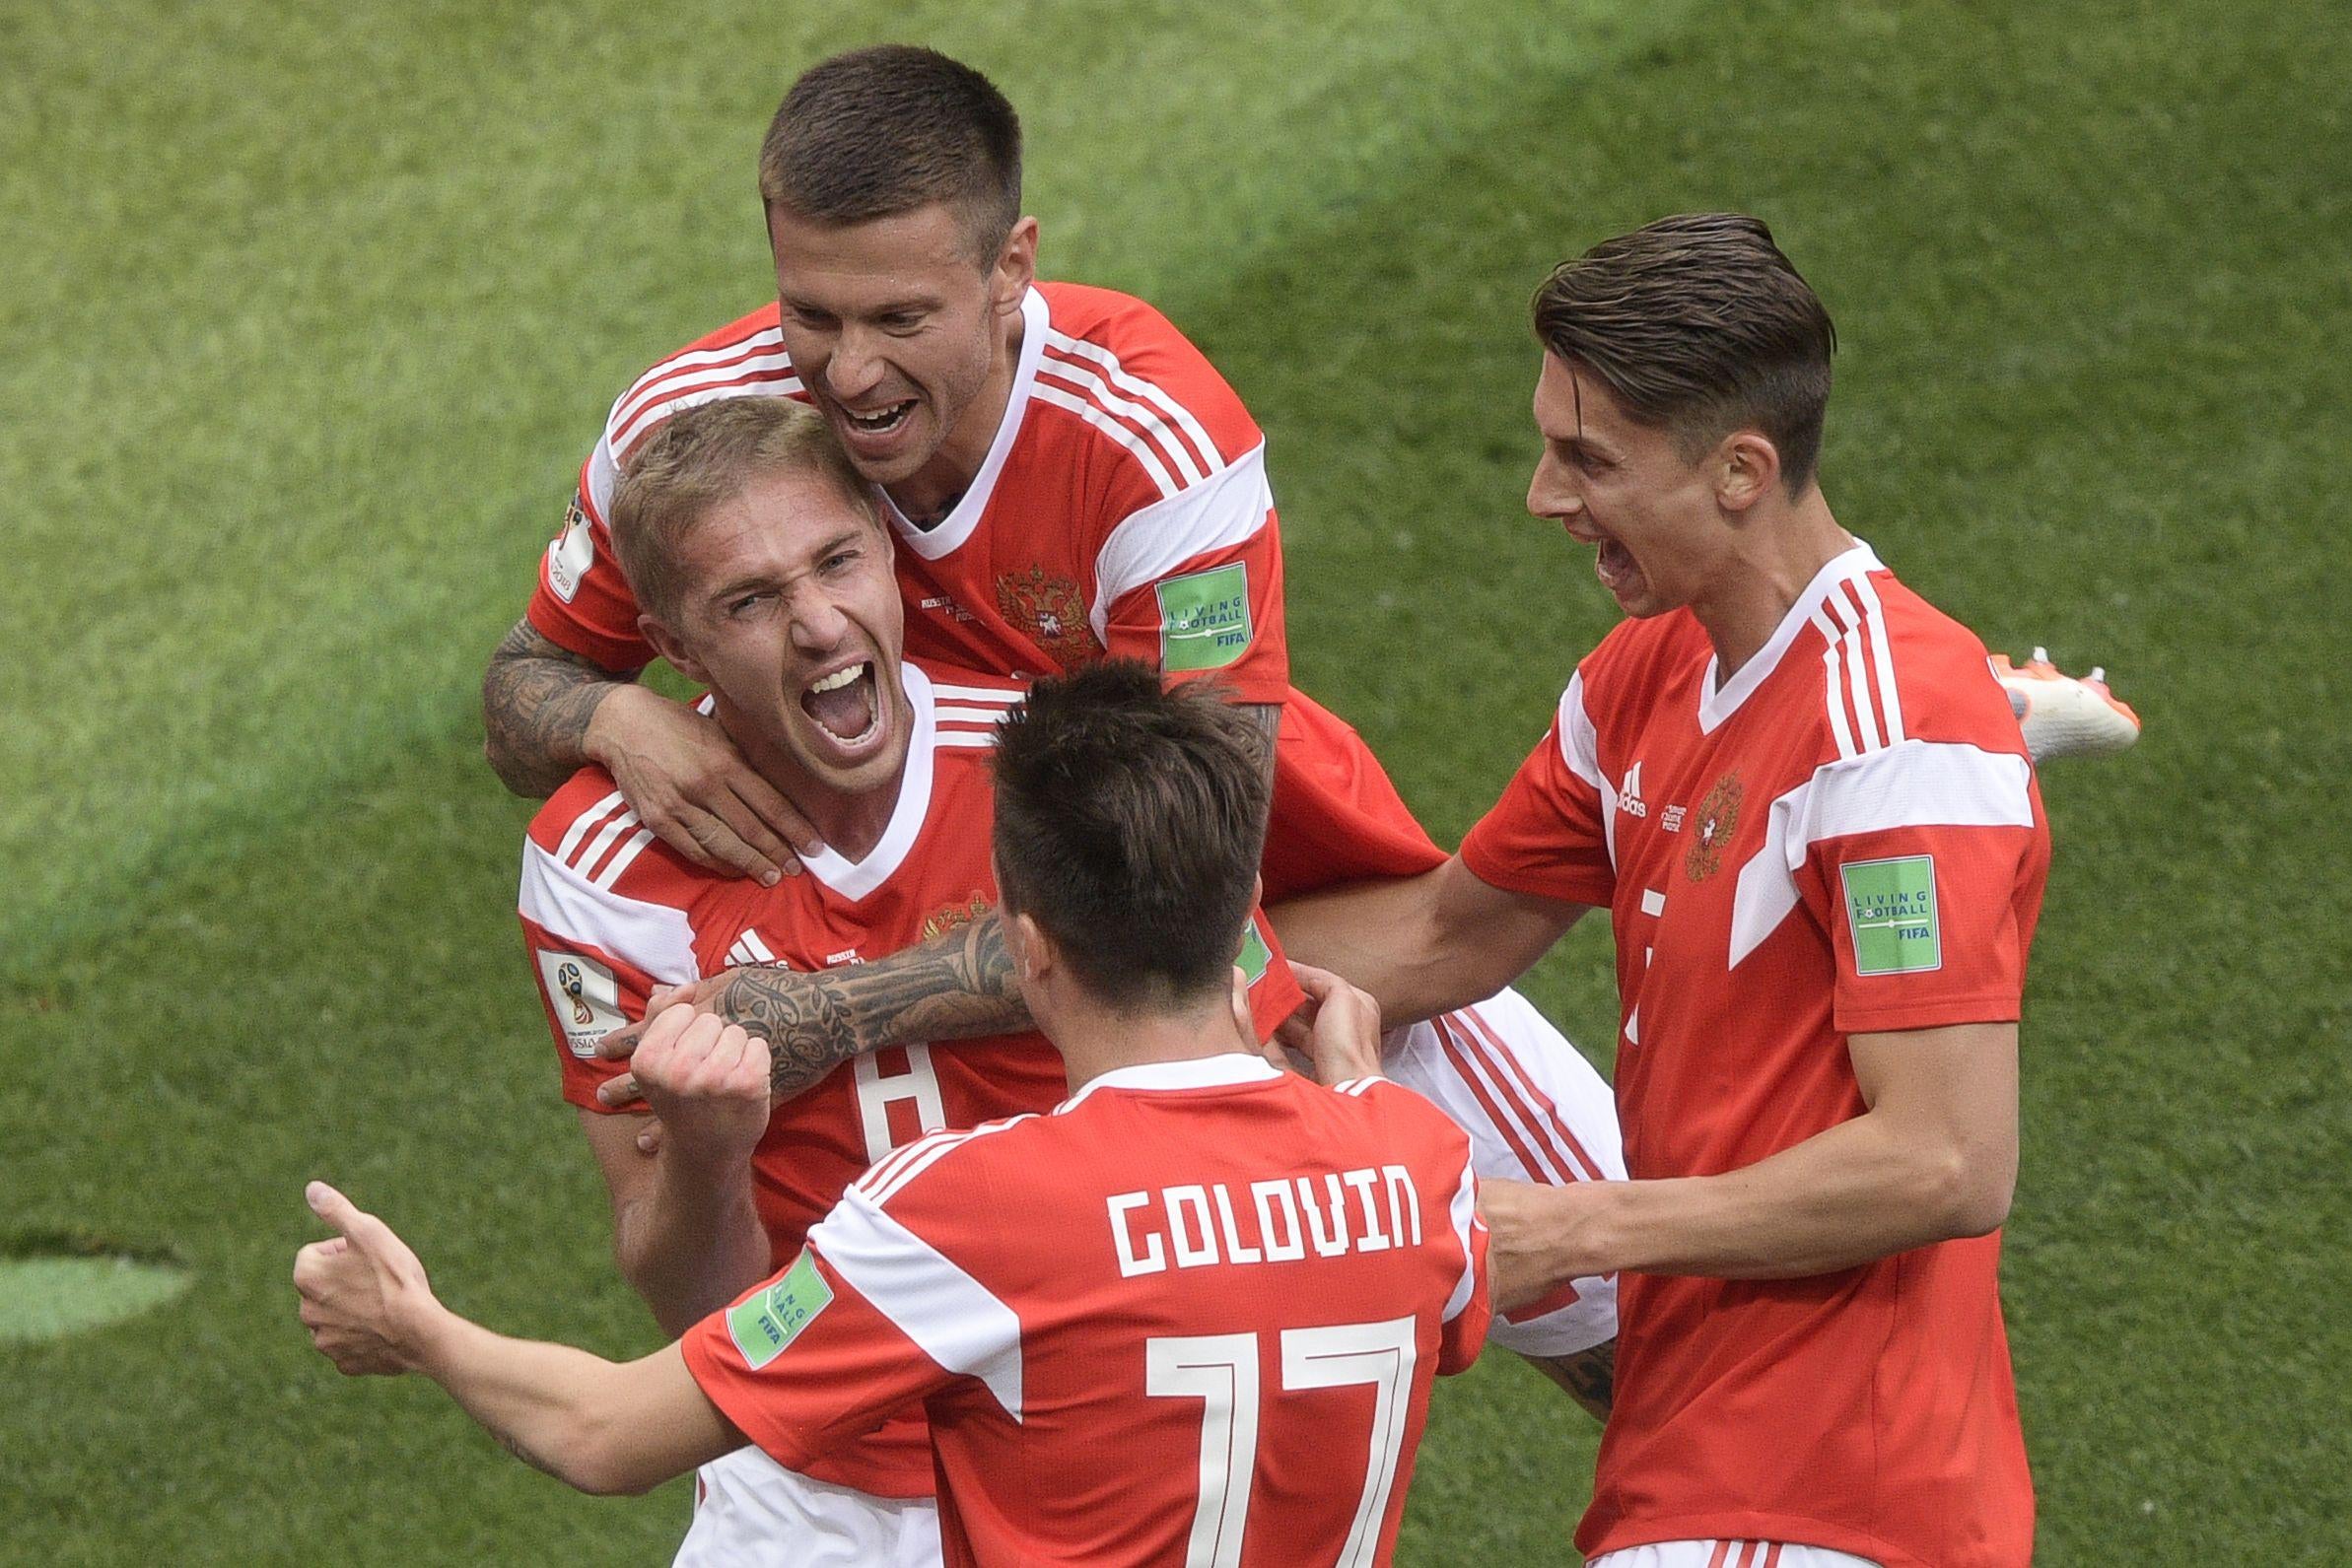 TOPSHOT - Russia's midfielder Yuri Gazinskiy (centre L) celebrates his goal with teammates during the Russia 2018 World Cup Group A football match between Russia and Saudi Arabia at the Luzhniki Stadium in Moscow on June 14, 2018. (Photo by Juan Mabromata / AFP) / RESTRICTED TO EDITORIAL USE - NO MOBILE PUSH ALERTS/DOWNLOADS        (Photo credit should read JUAN MABROMATA/AFP/Getty Images)